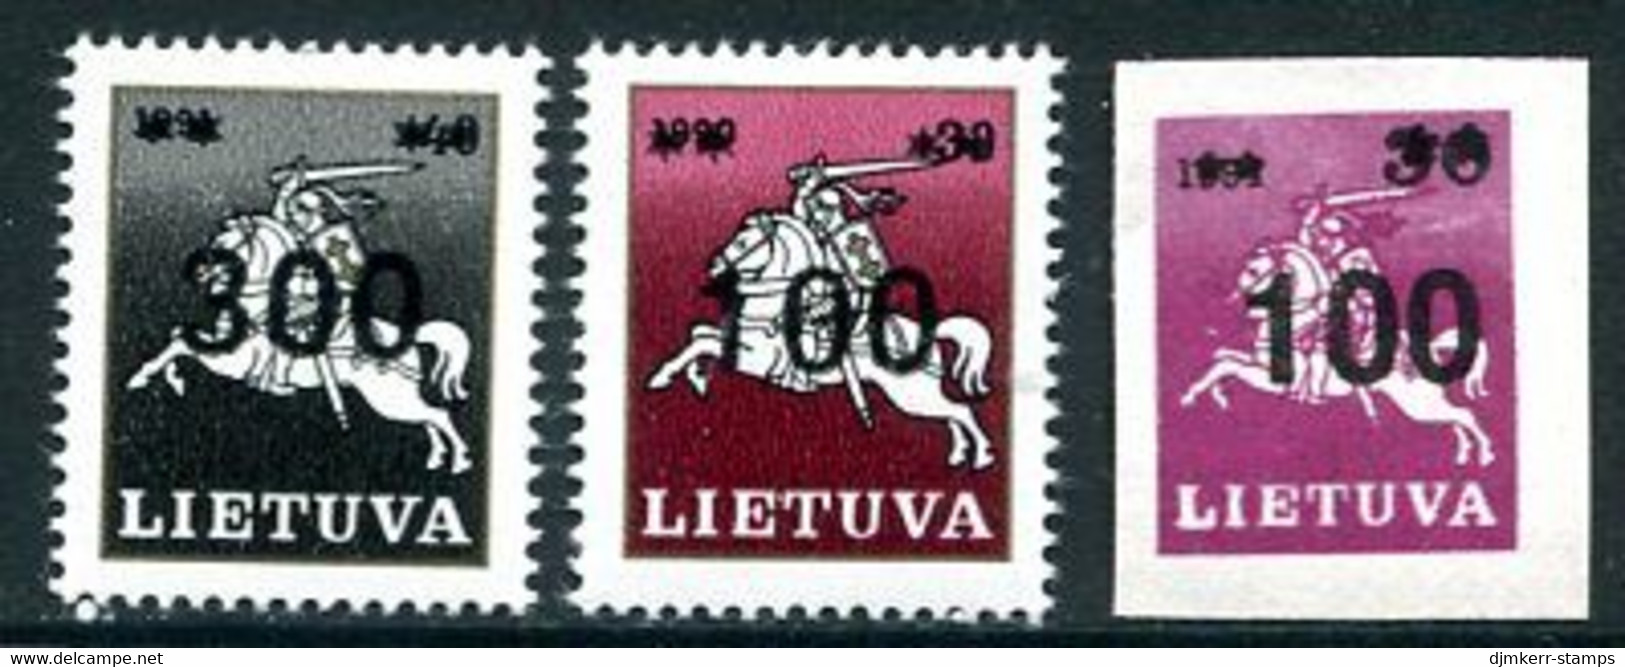 LITHUANIA 1993 Surcharges (3) MNH / **.  Michel 514-15, 522 - Lithuania